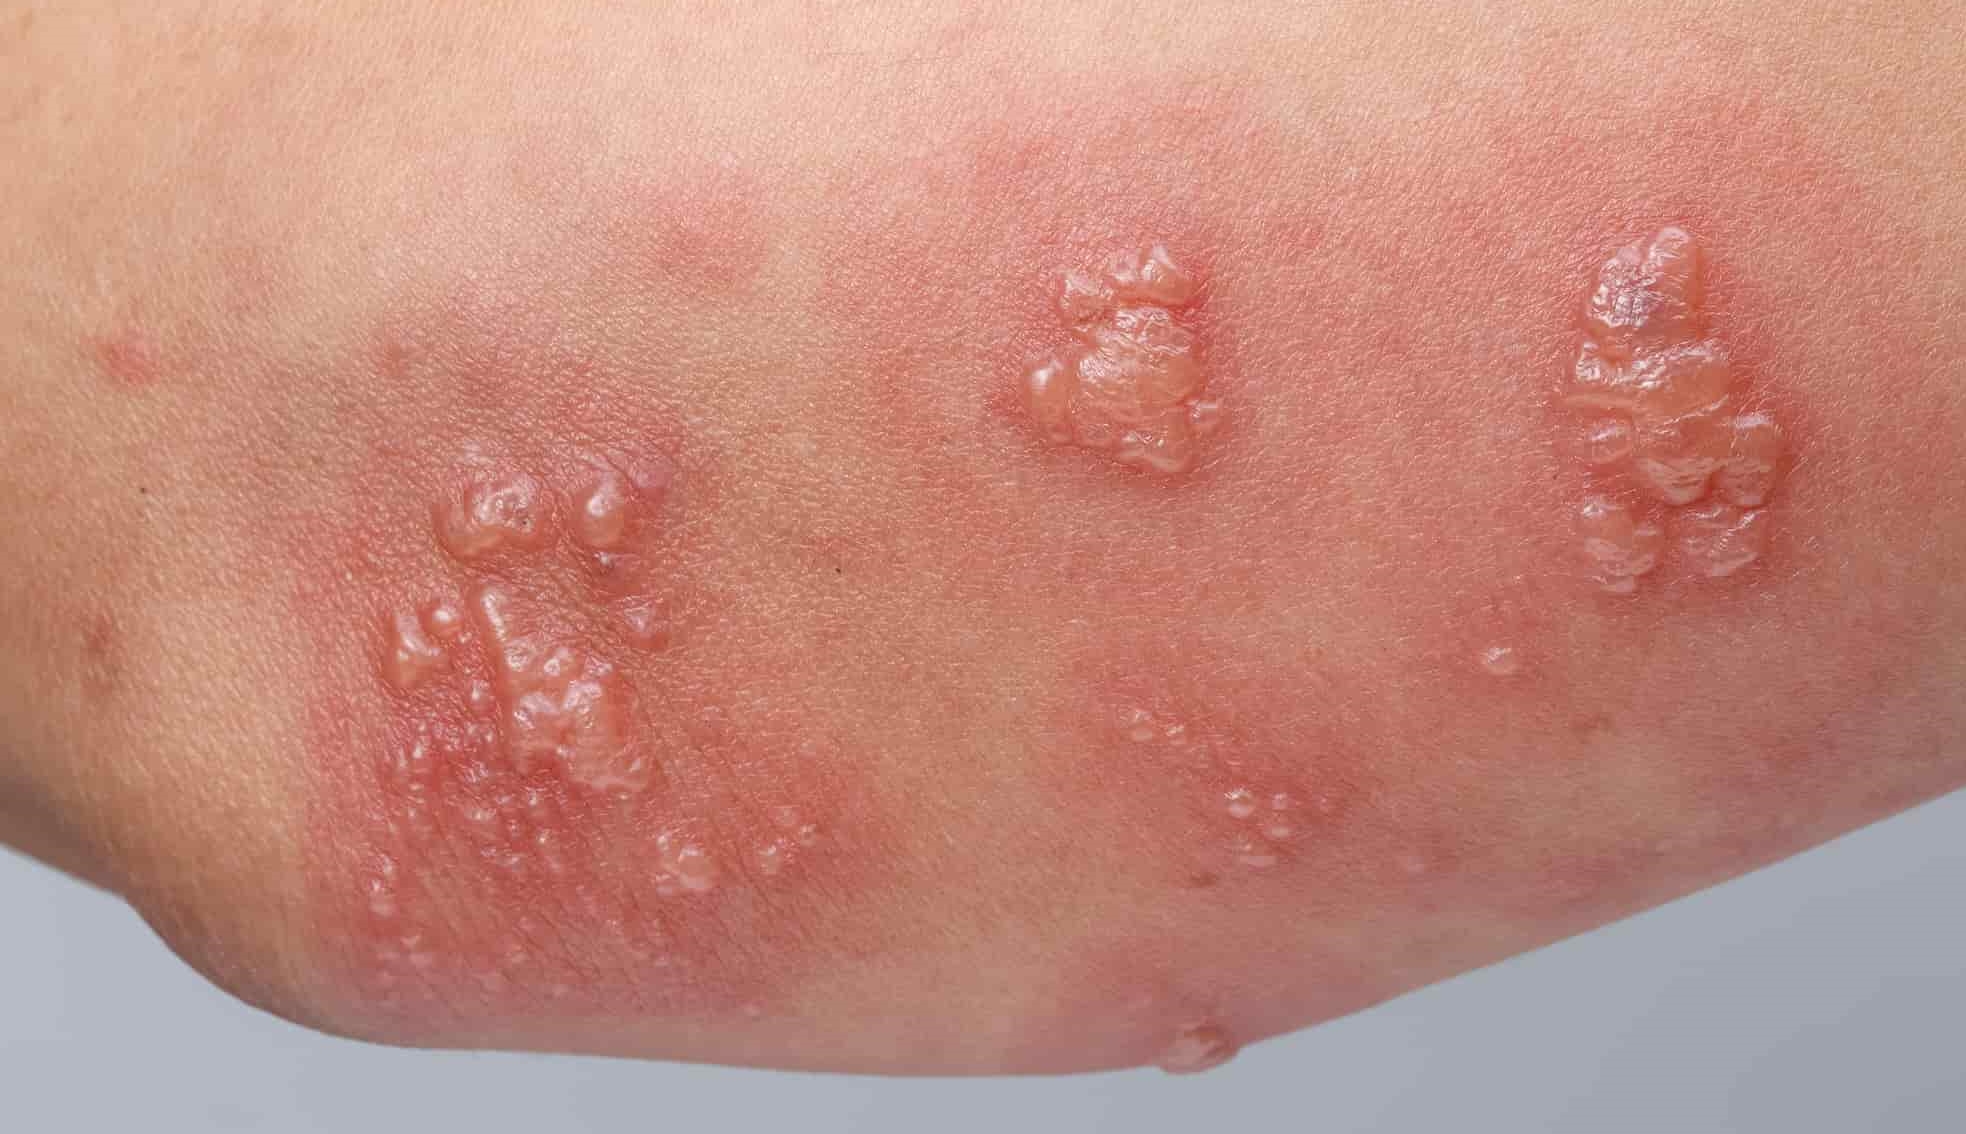 Rashes from Pads: Treatment, Symptoms, How Long It Lasts, and Pictures